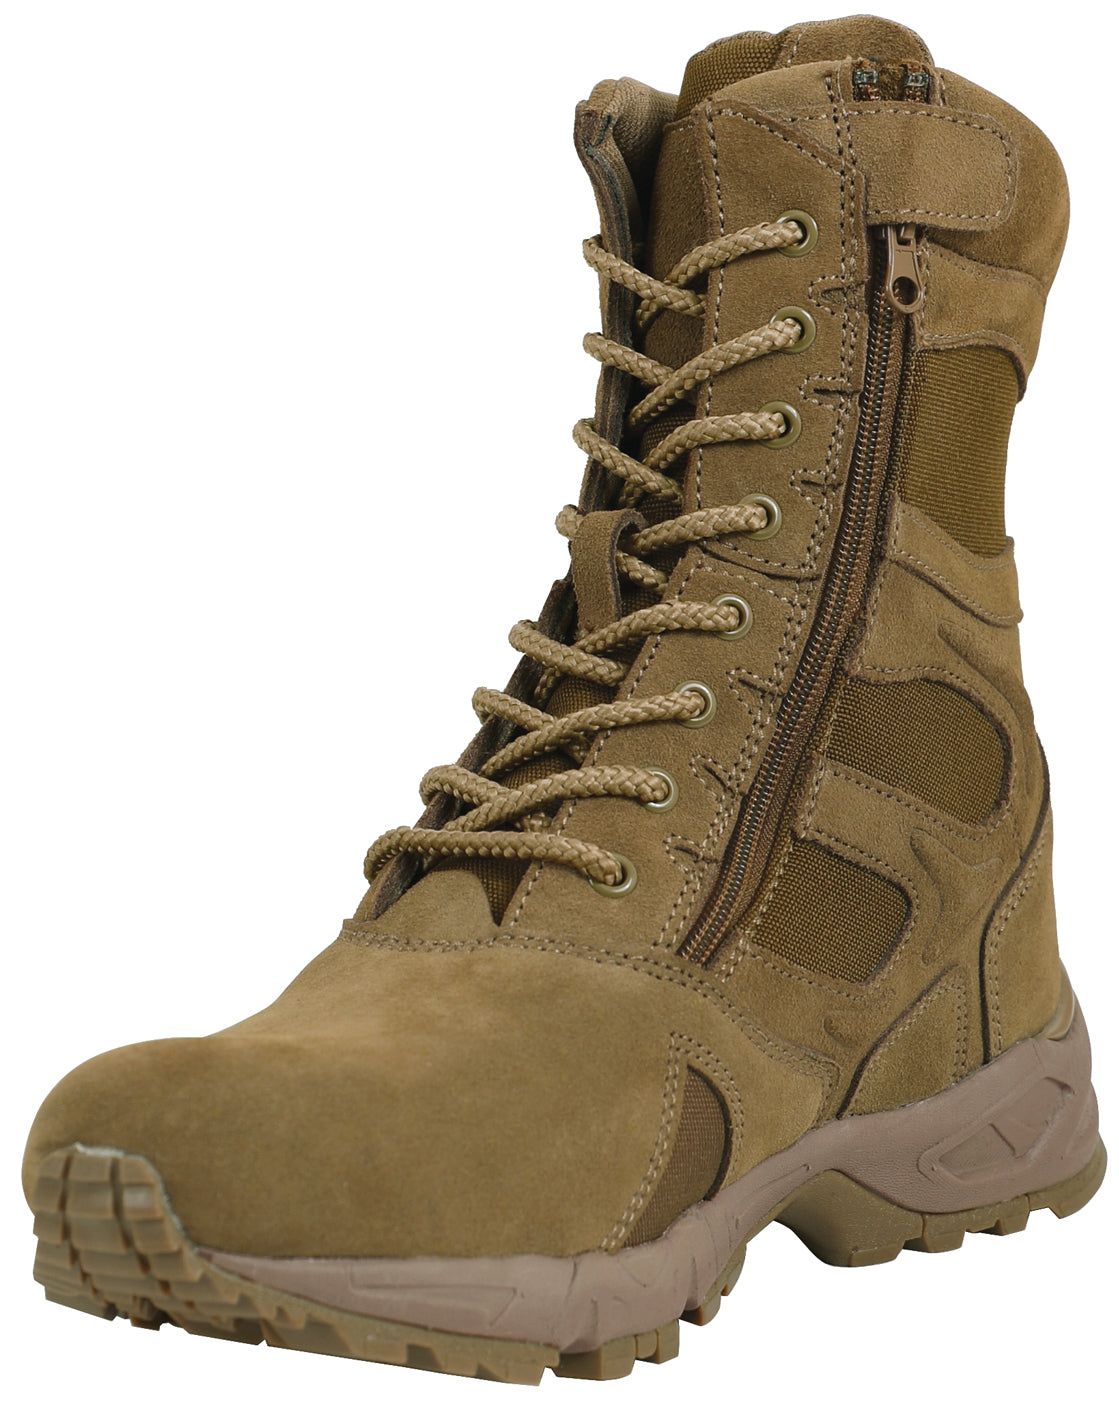 Milspec Forced Entry Deployment Boots With Side Zipper - 8 Inch AR 670-1 Compliant Military Gear MilTac Tactical Military Outdoor Gear Australia